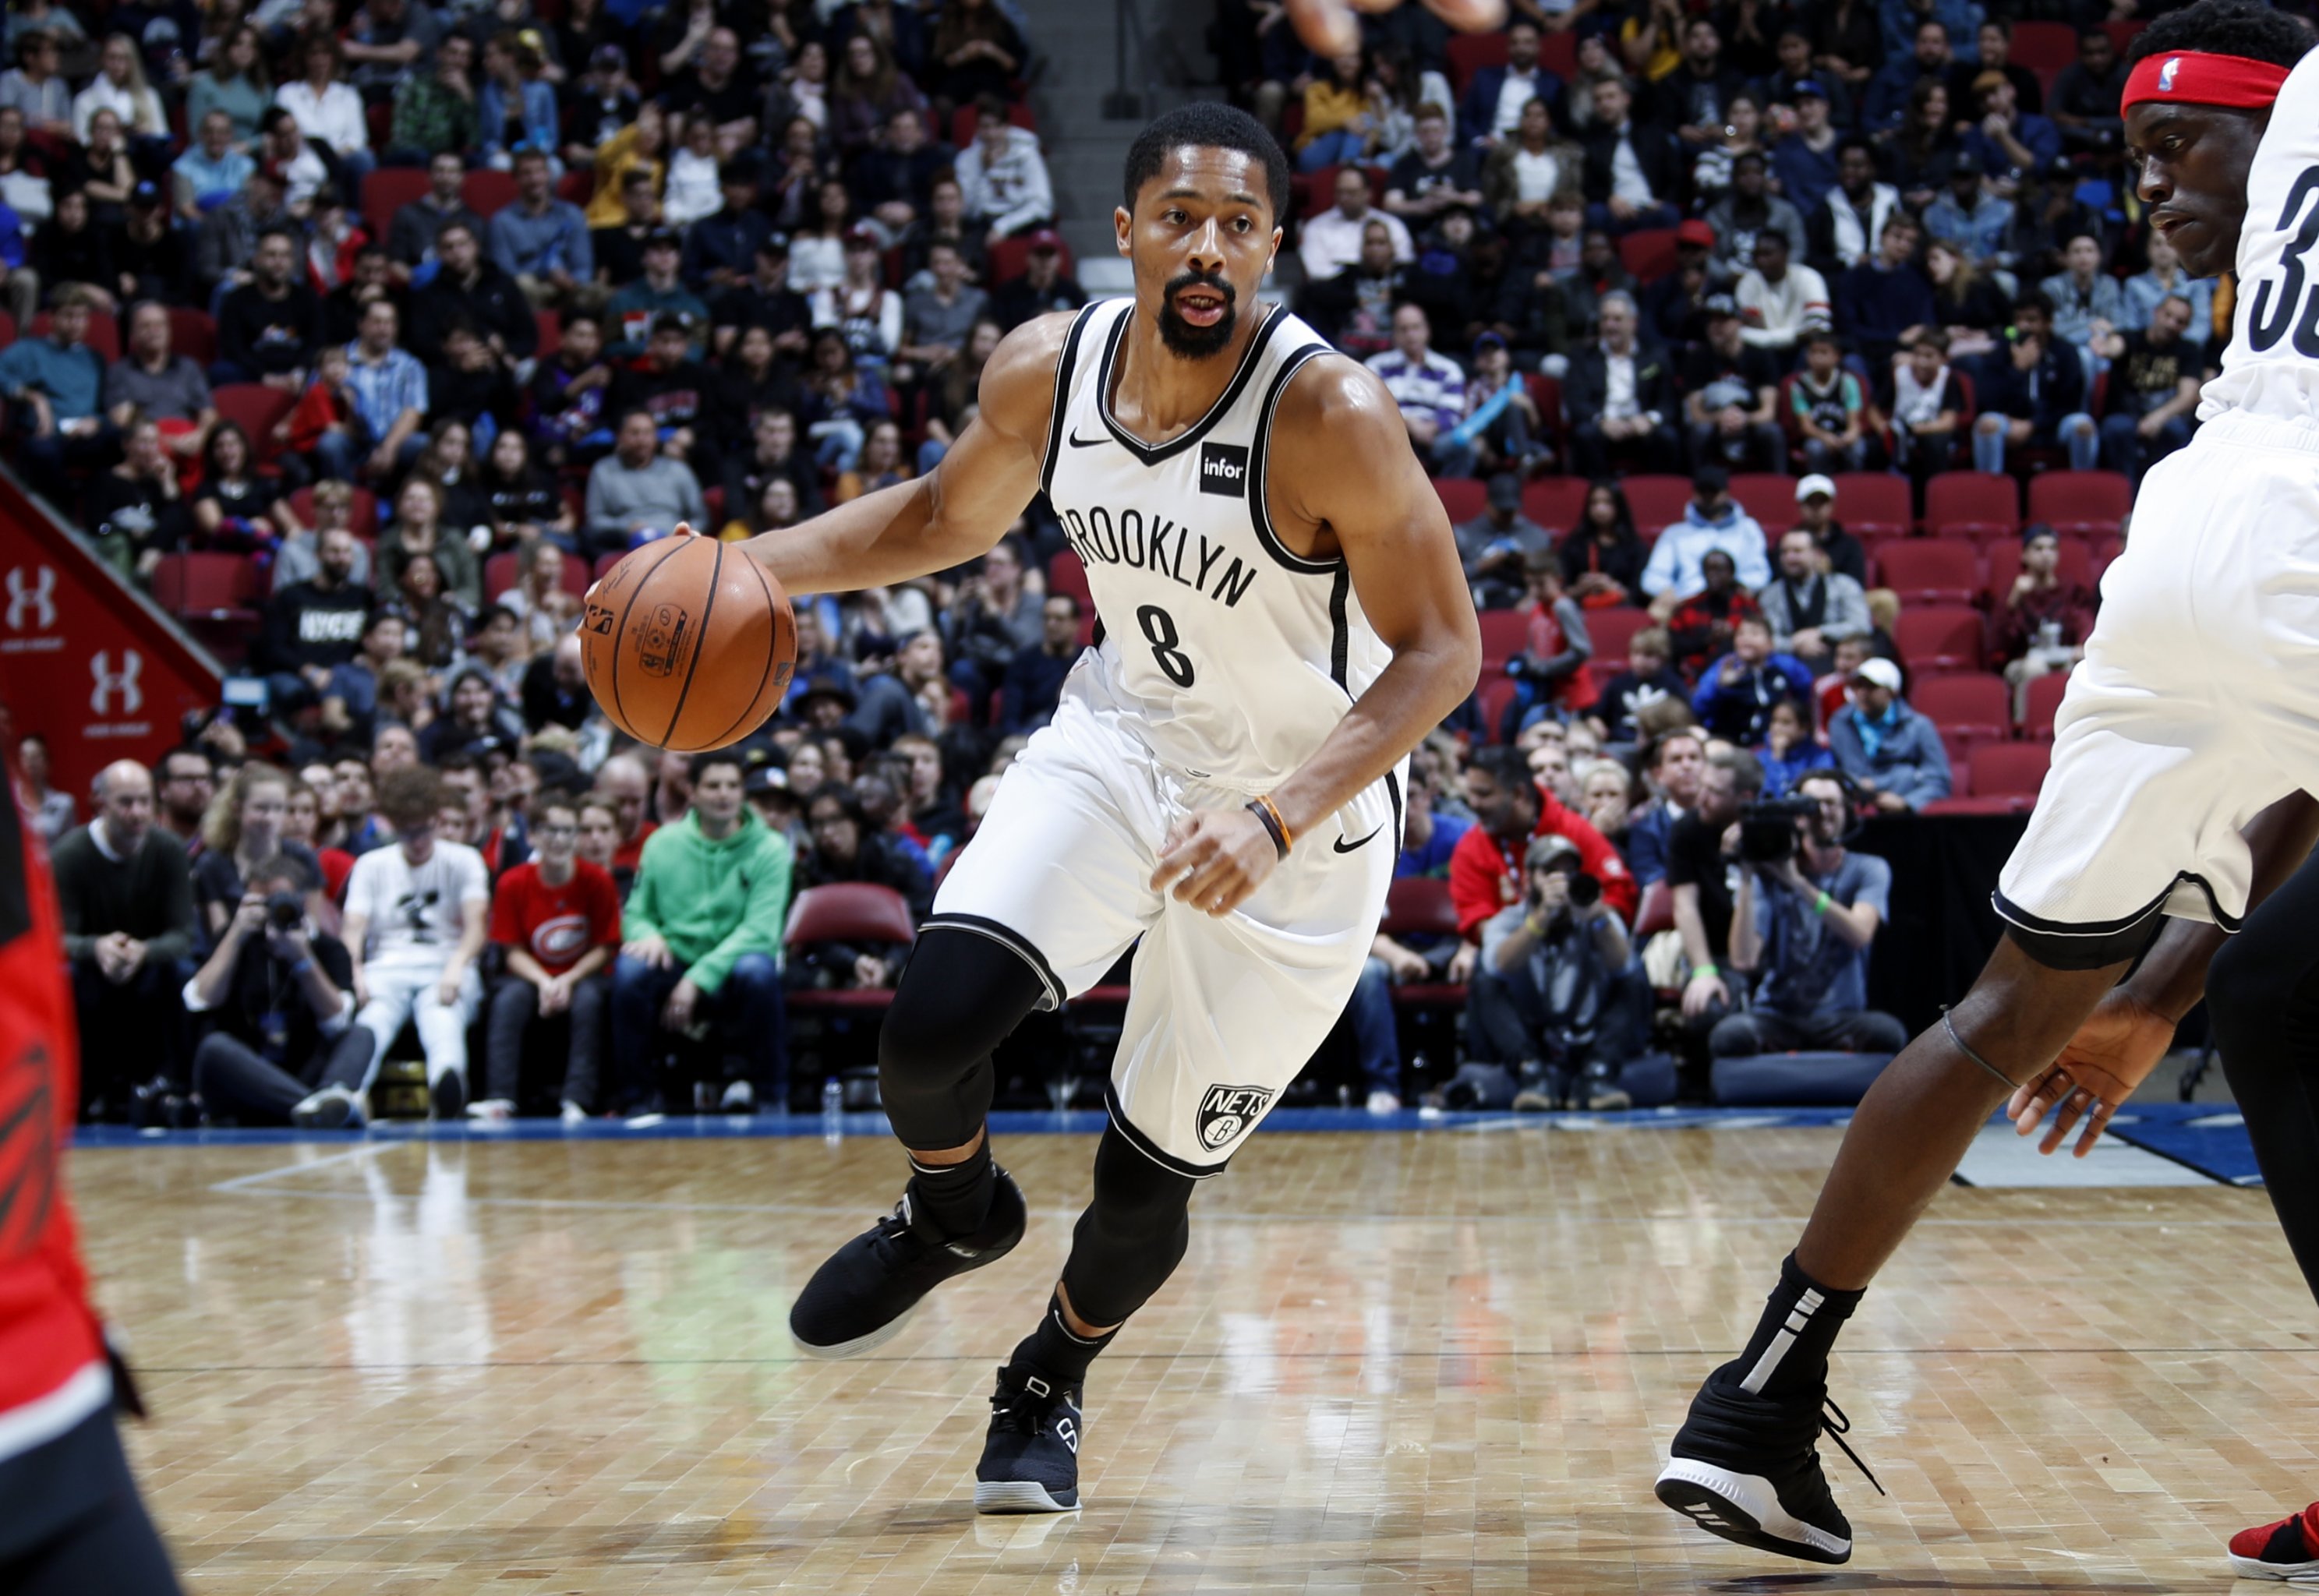 Has Spencer Dinwiddie Got A Deal For You Bleacher Report Latest News Videos And Highlights